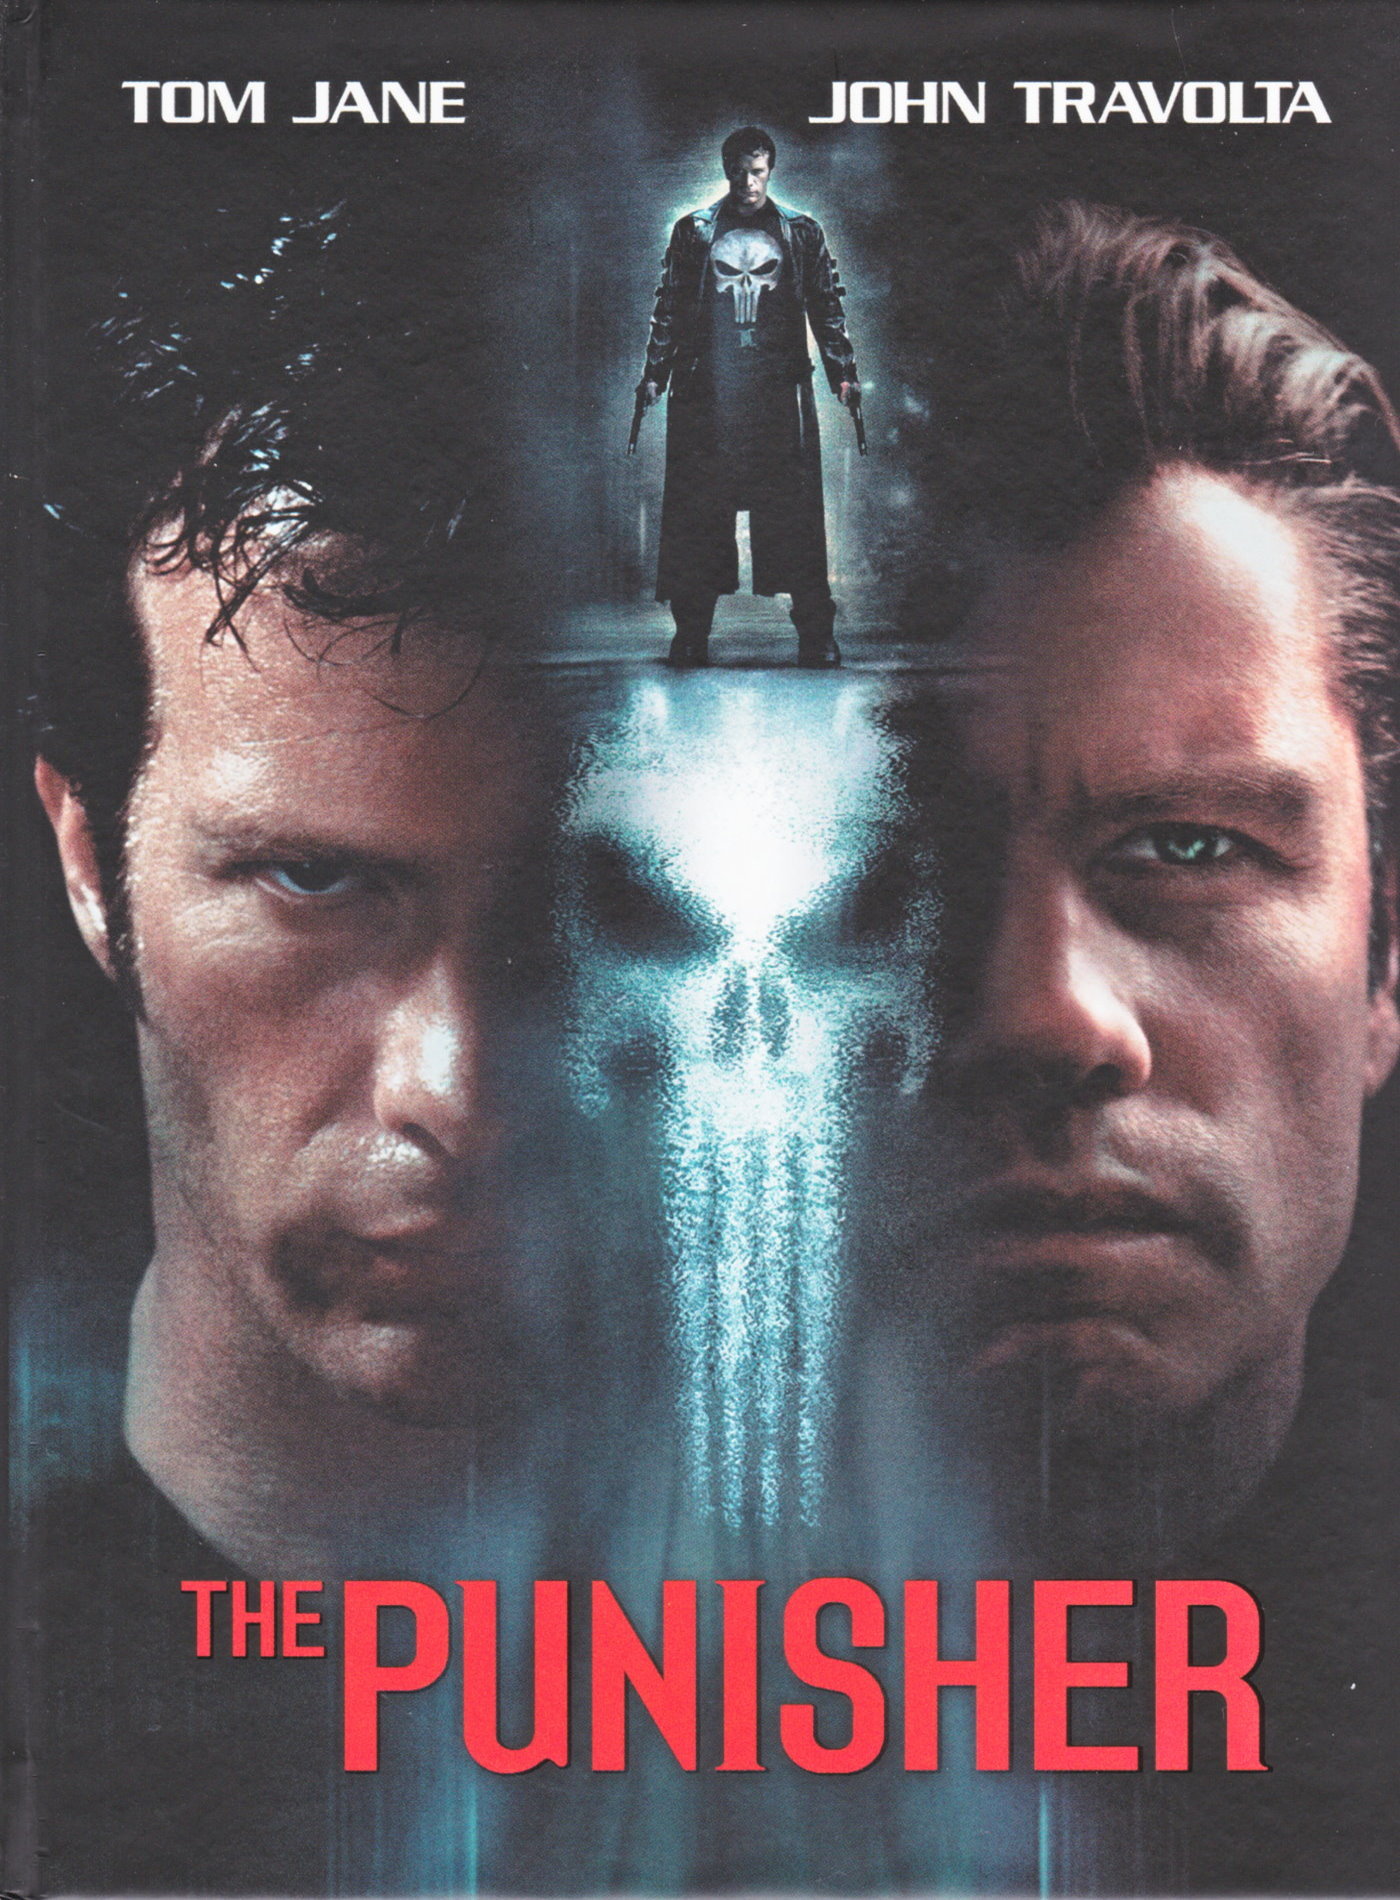 Cover - The Punisher.jpg